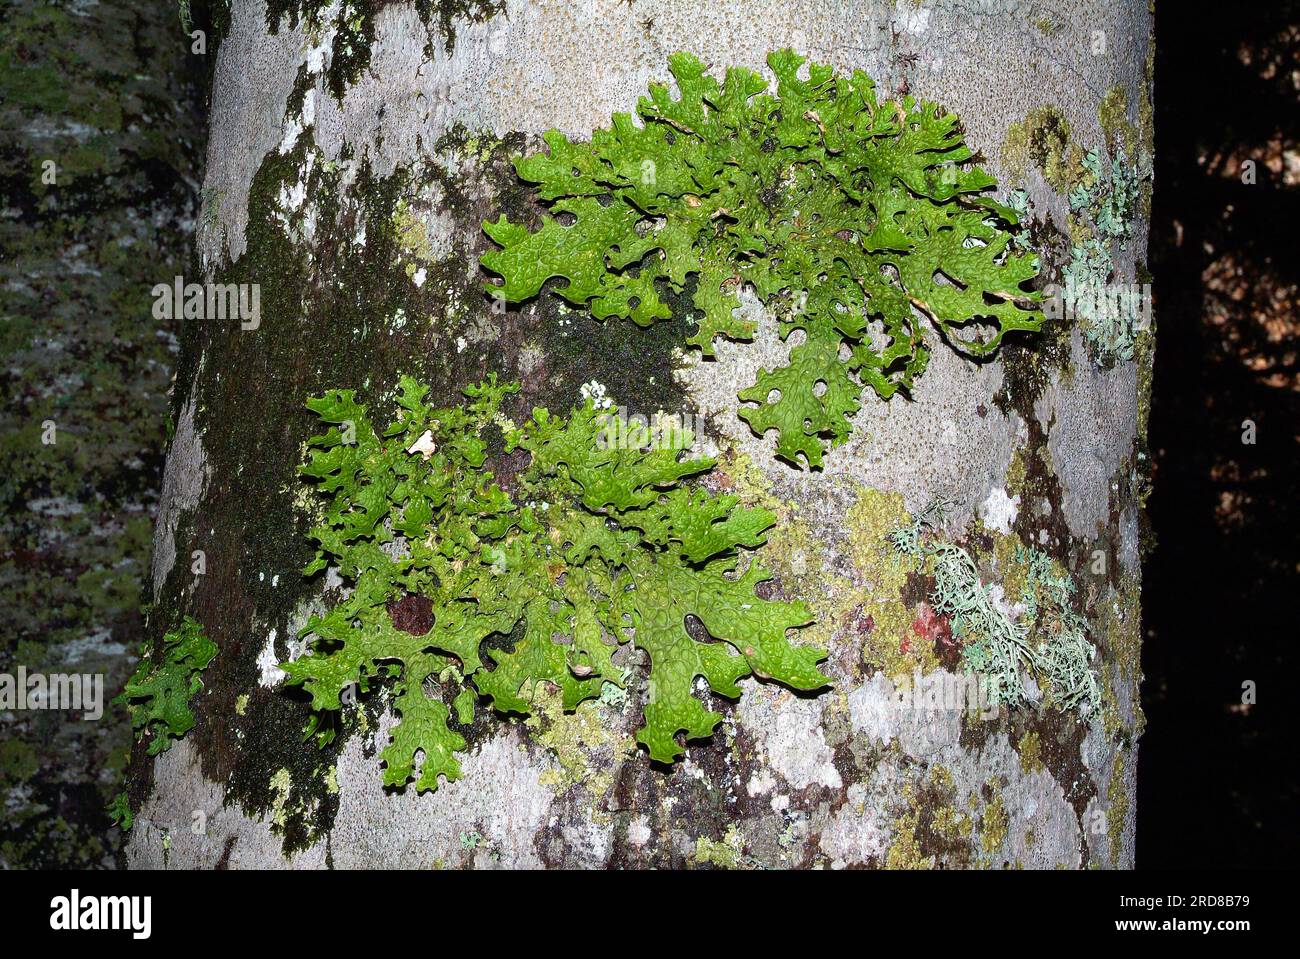 Lung lichen or lungwort lichen (Lobaria pulmonaria) is an epiphytic foliose lichen formed by the symbiotic union of one fungus species, an  green alga Stock Photo